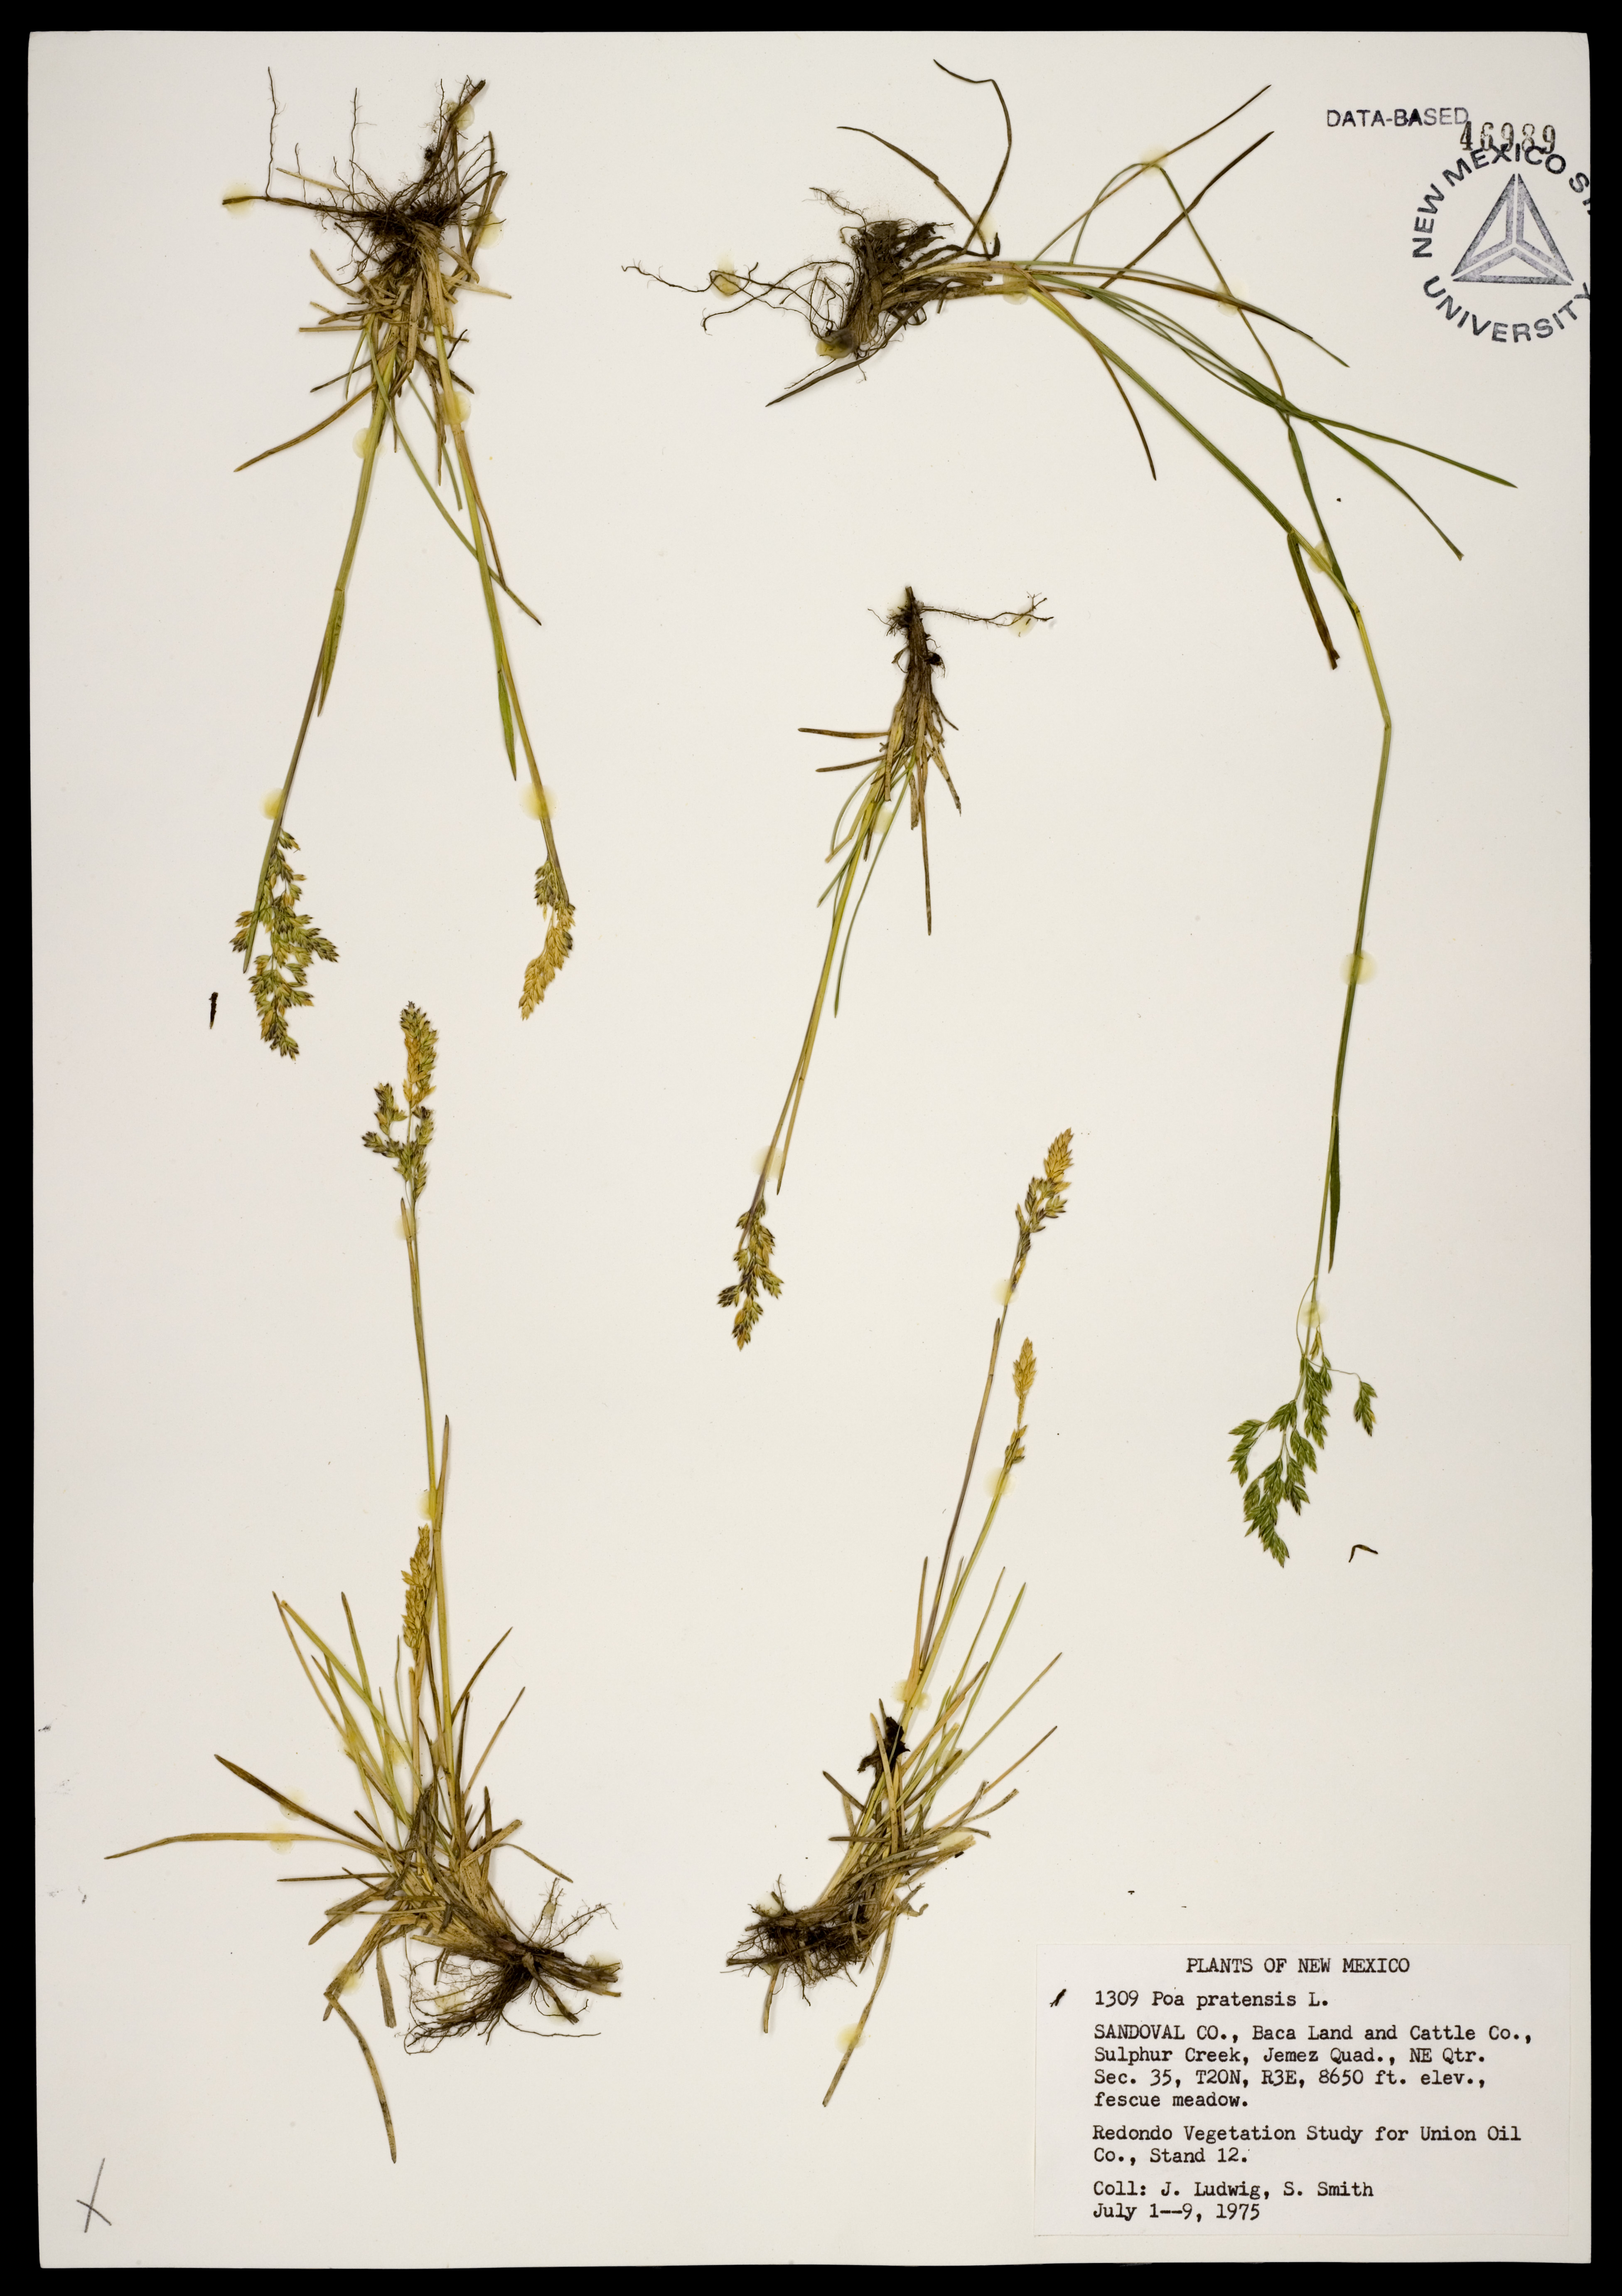 Herbarium specimen showing leaves and roots in addition to panicles with seeds